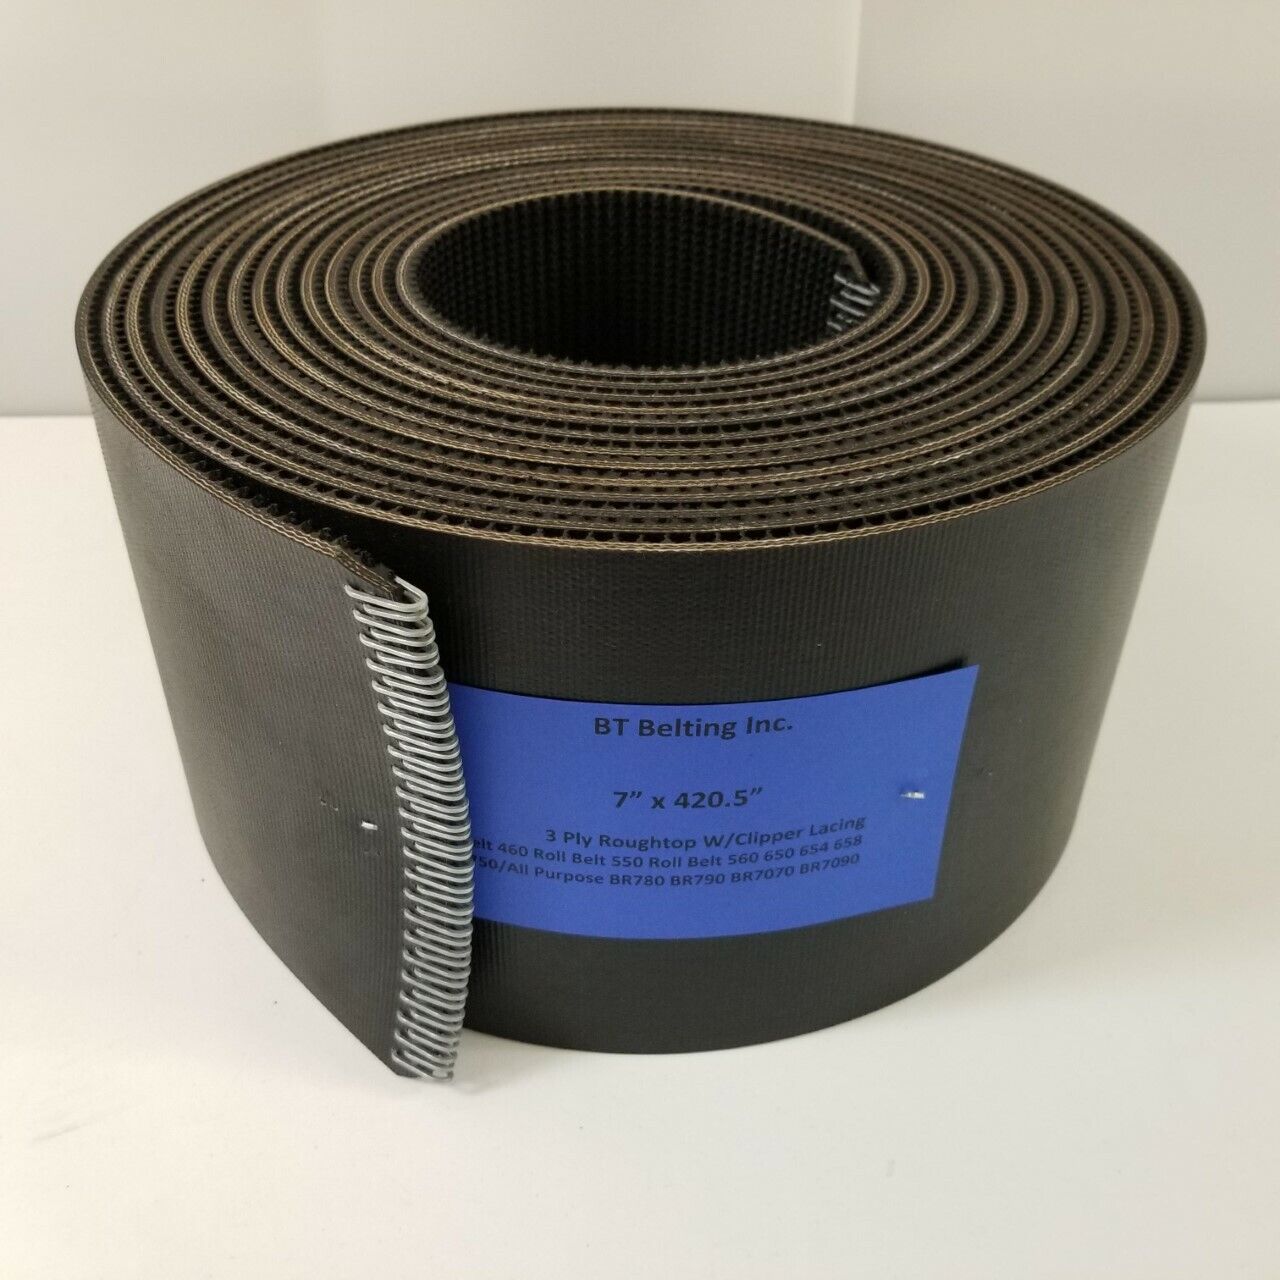 New Fresno Mall Holland BR780 Round Baler Belts Set 3 Sales results No. 1 Ply Roughtop Complete